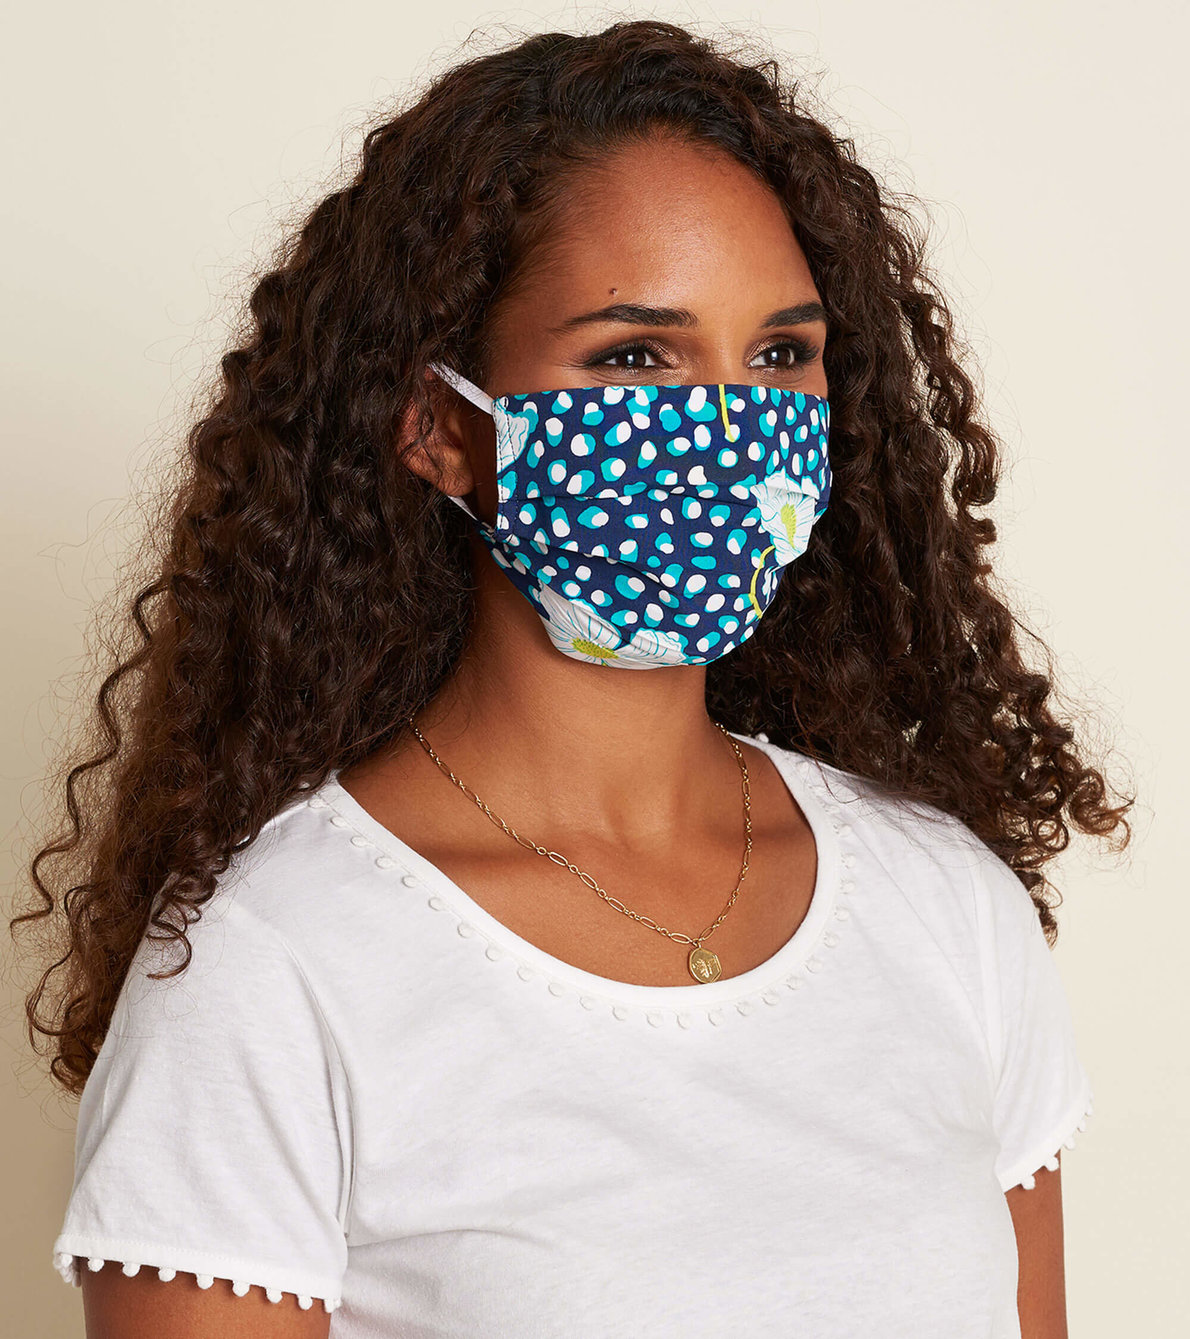 View larger image of Non-Medical Reusable Adult Face Mask - Flower Dots